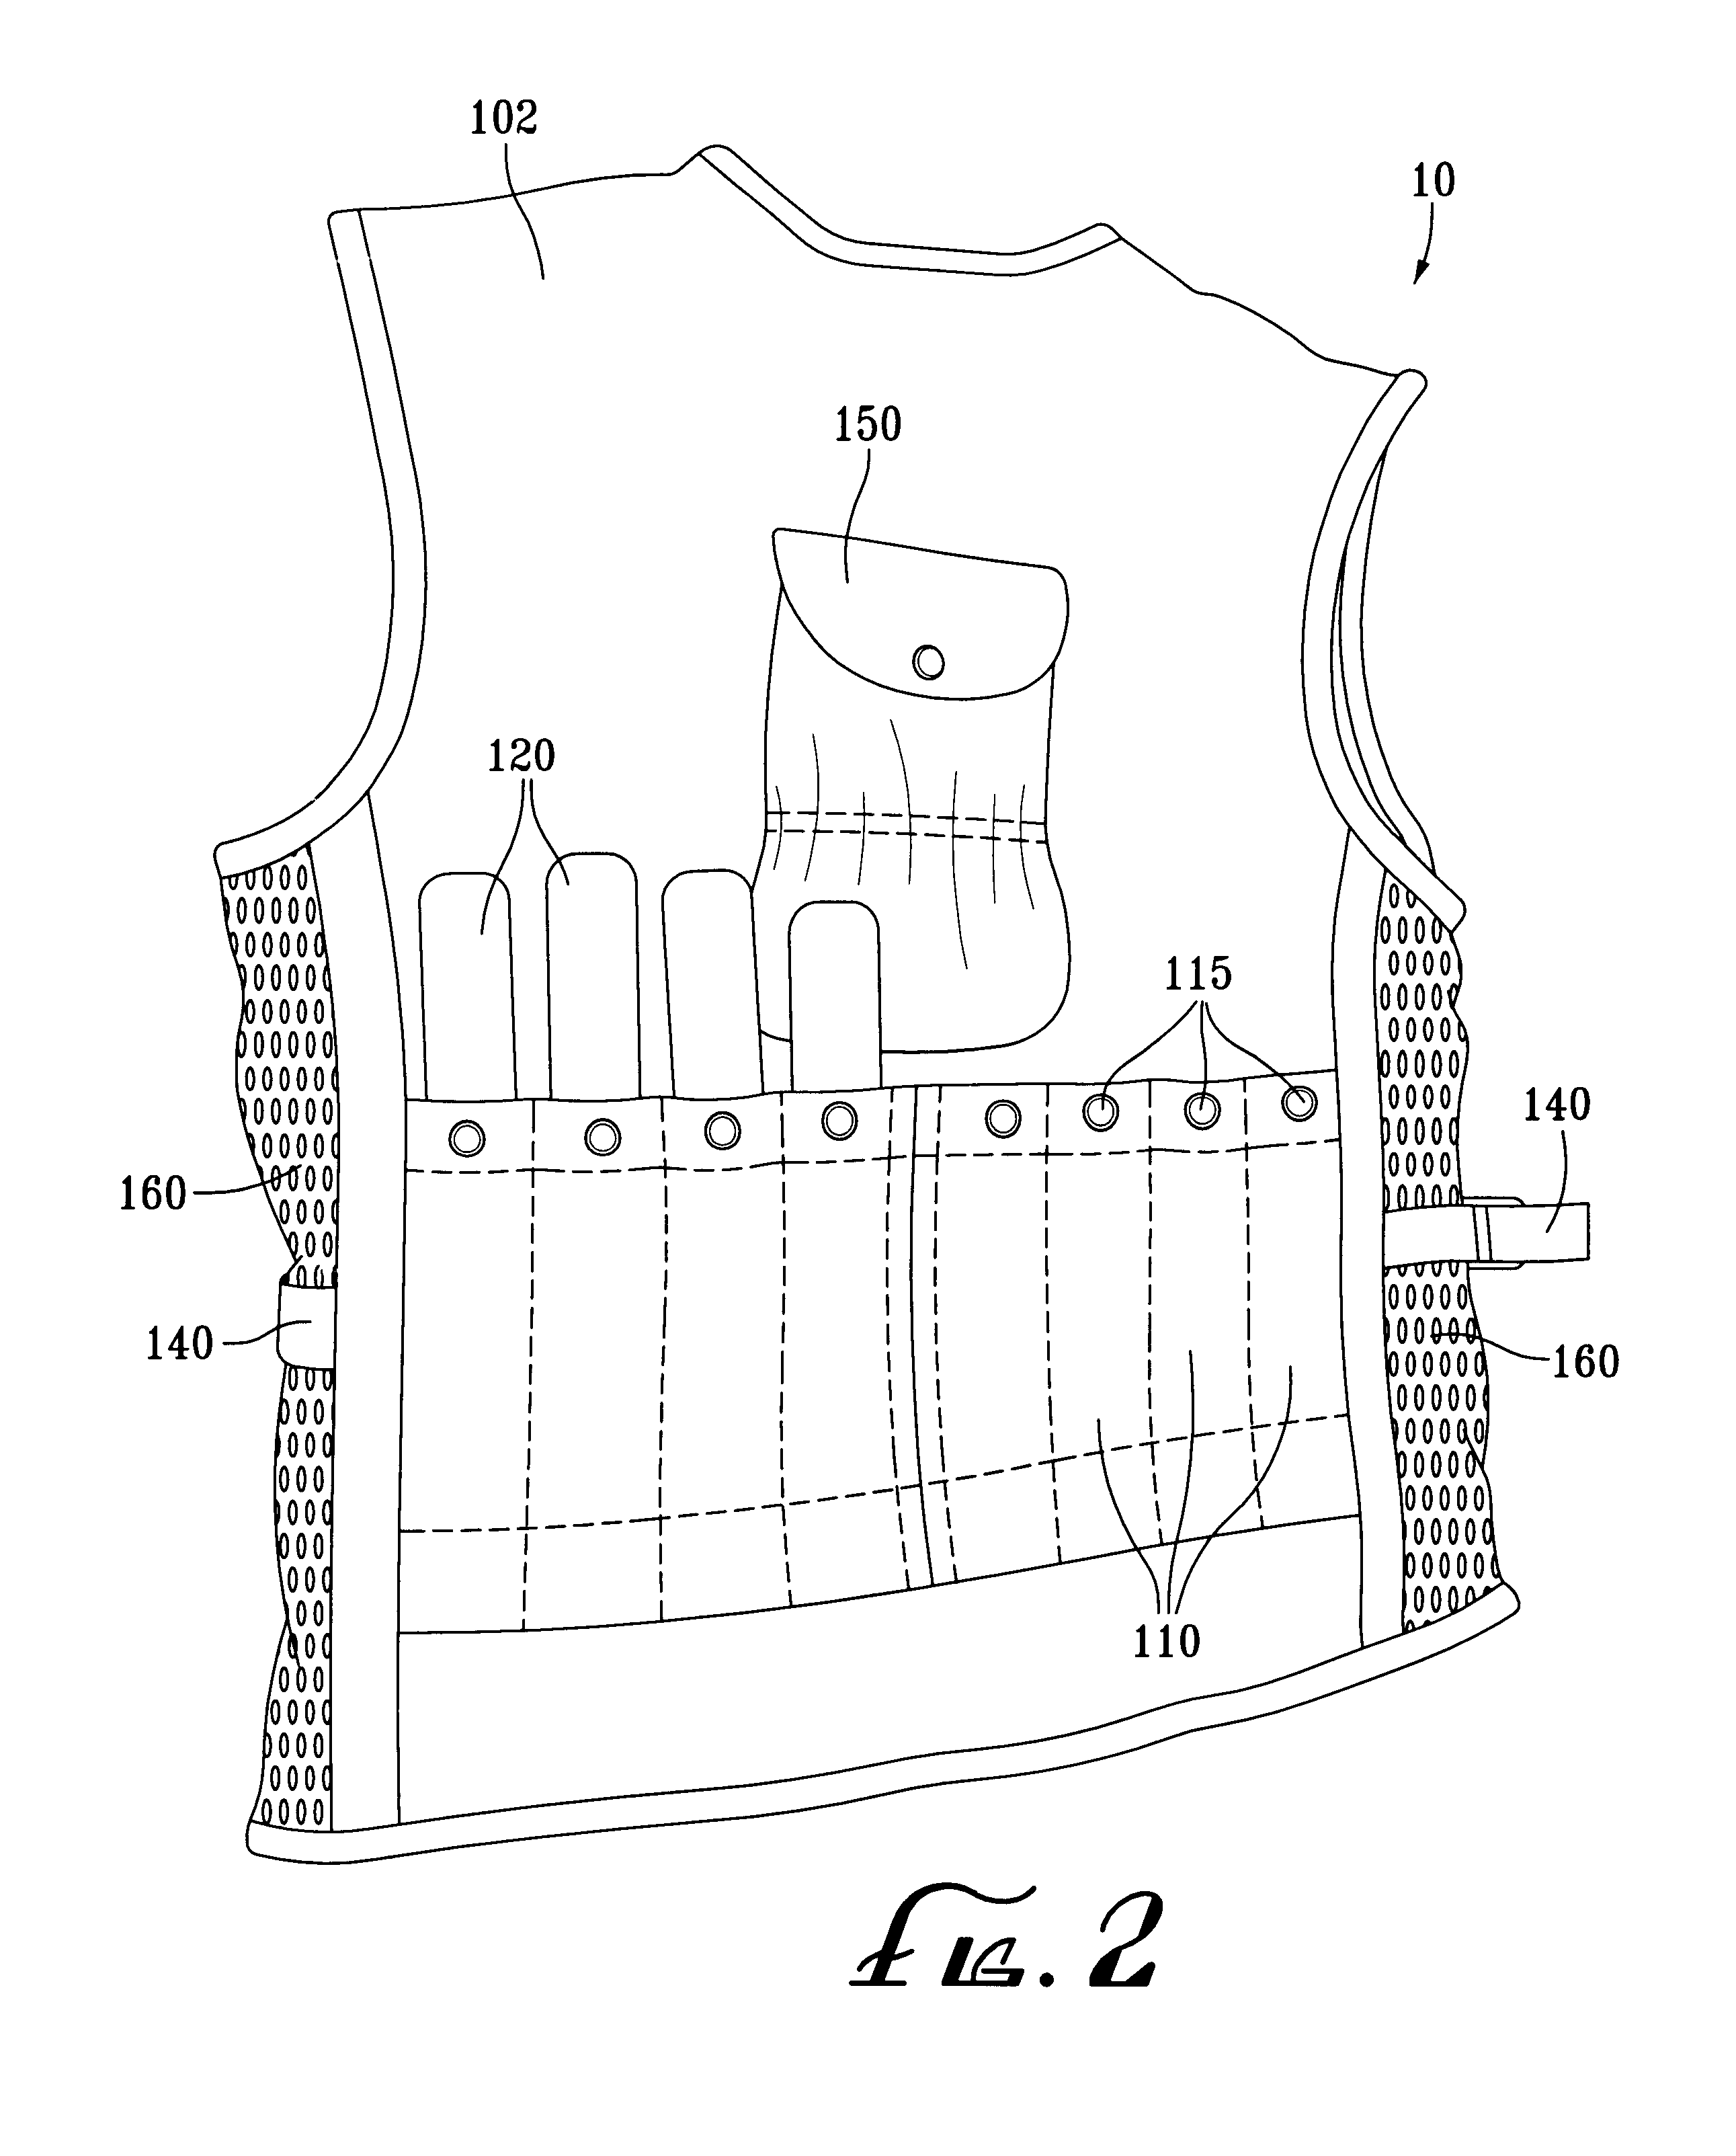 Method of wearing weighted training vest while listening to audio equipment